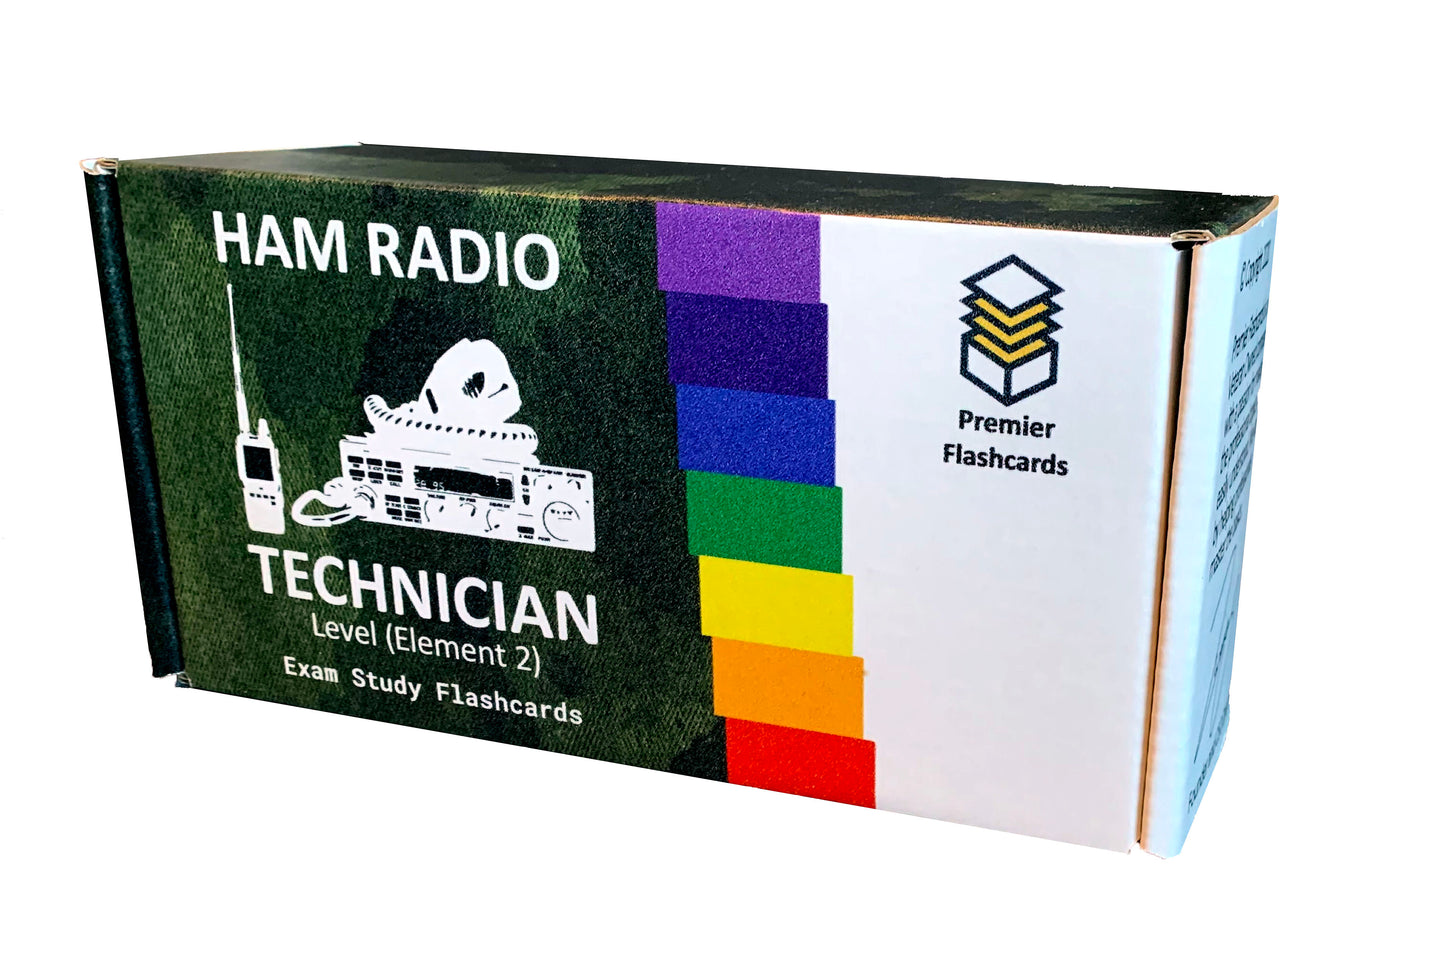 Premier Flashcards- Ham Radio Technician License Study Flashcards | All 412 Questions and Answers for The Technician (Element 2) License Exam | Made in USA | *Exam Effective Date 2022-2026*